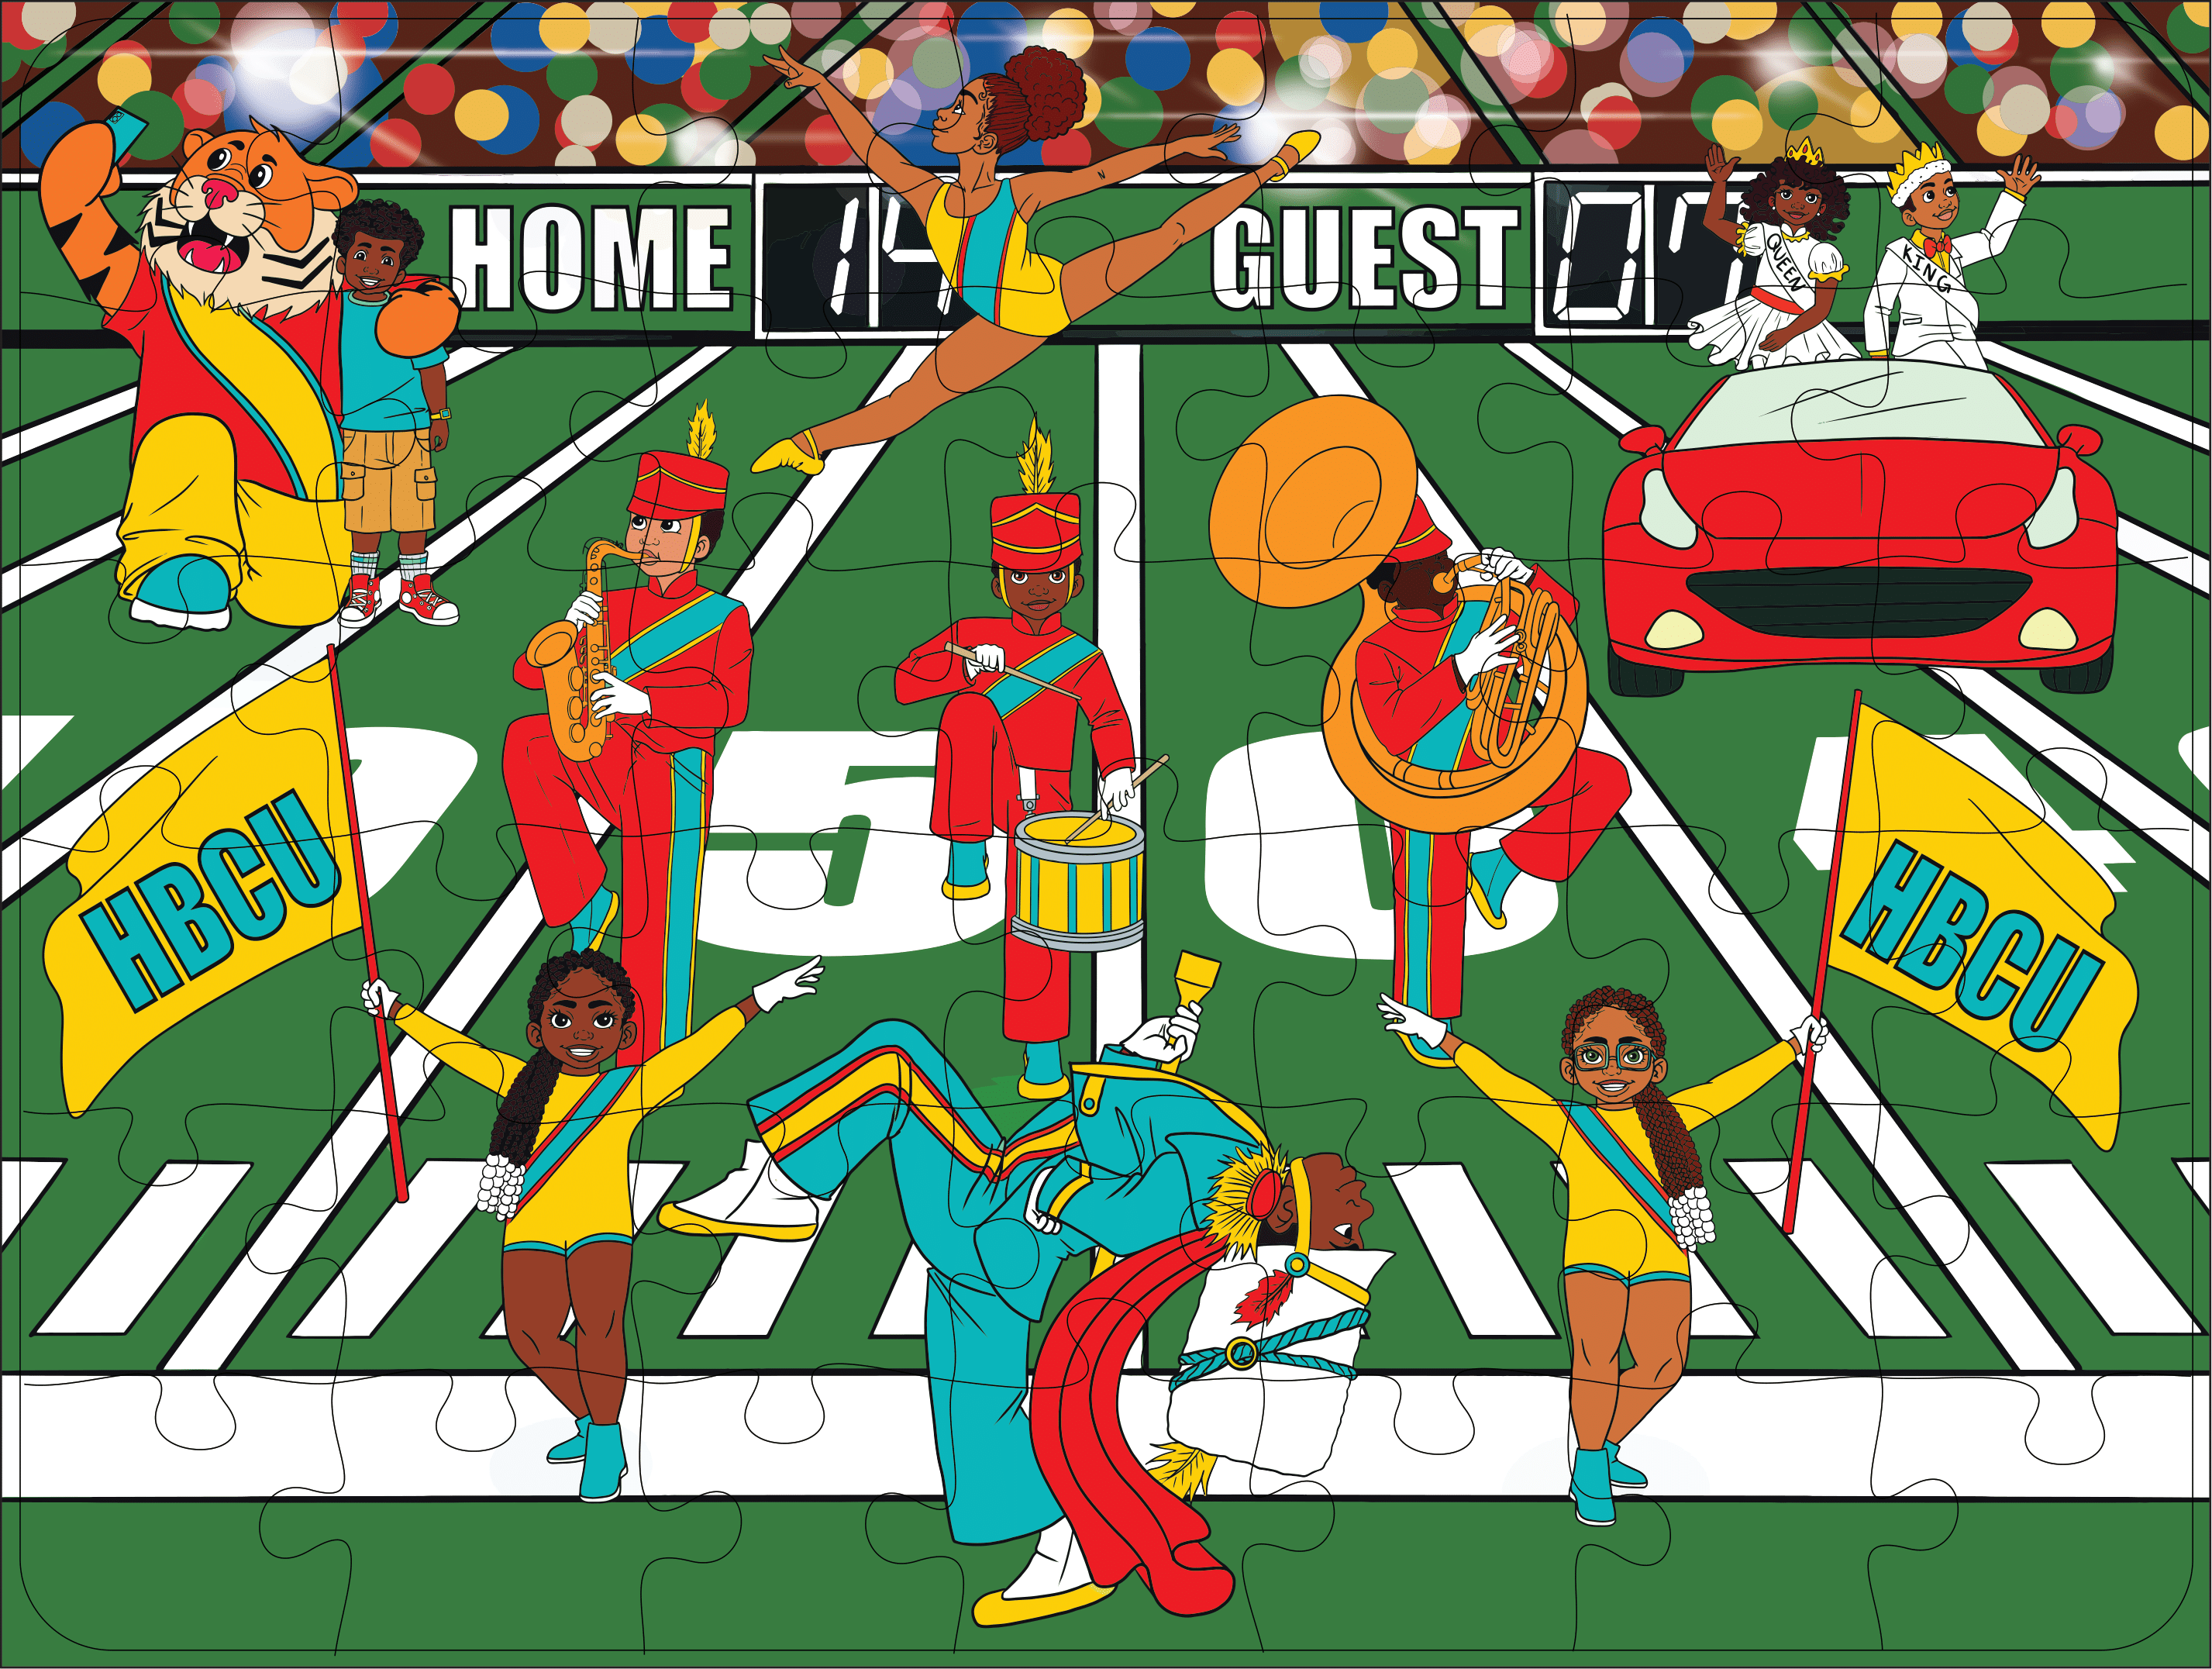 HBCU Homecoming Puzzle (42 pieces)